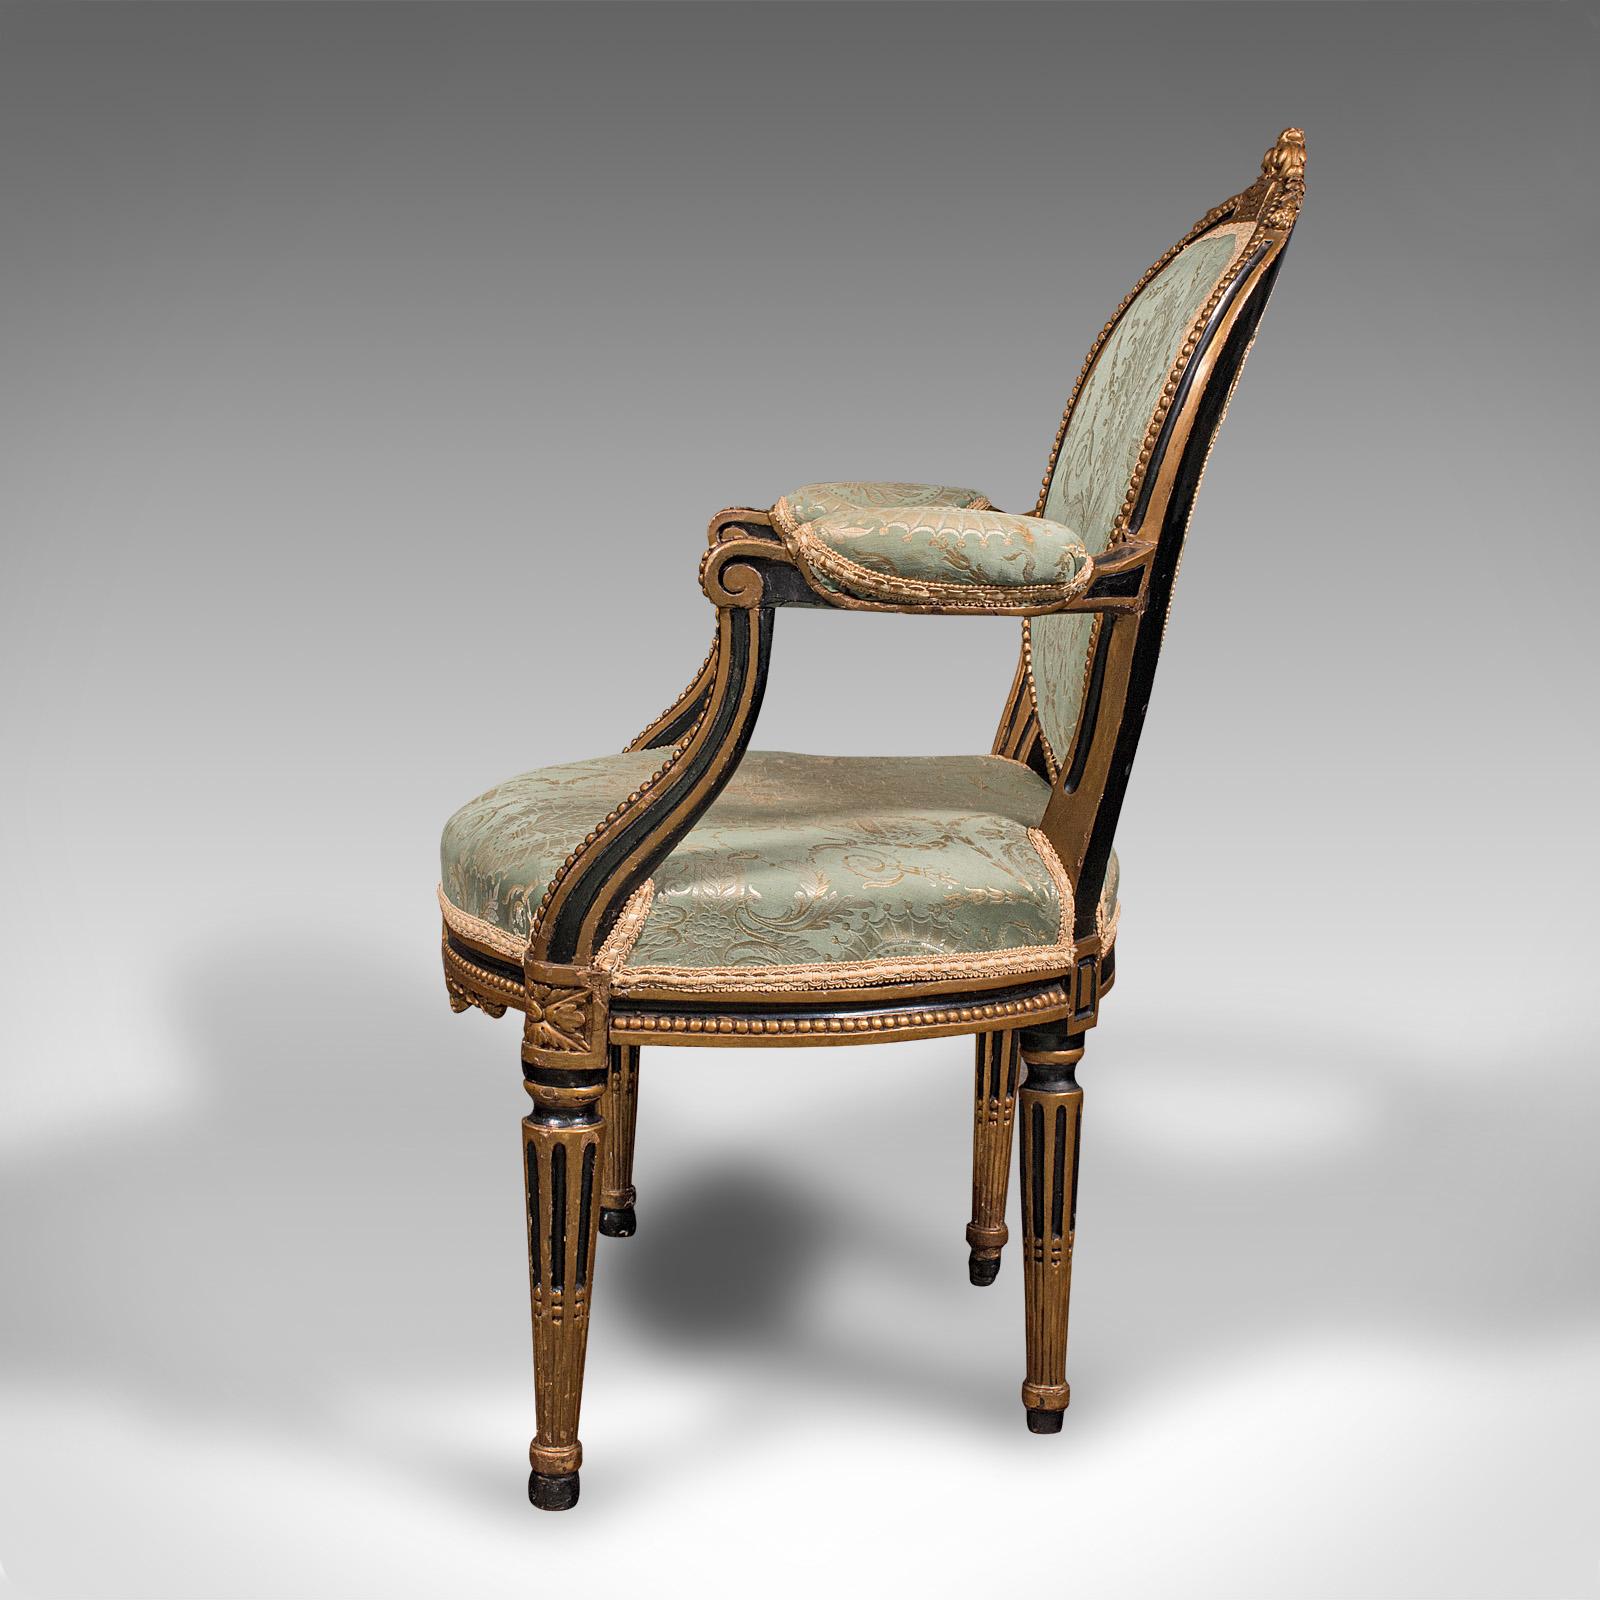 Antique Dressing Room Armchair, English, Elbow Chair, Silk Cotton, Regency, 1820 In Good Condition For Sale In Hele, Devon, GB